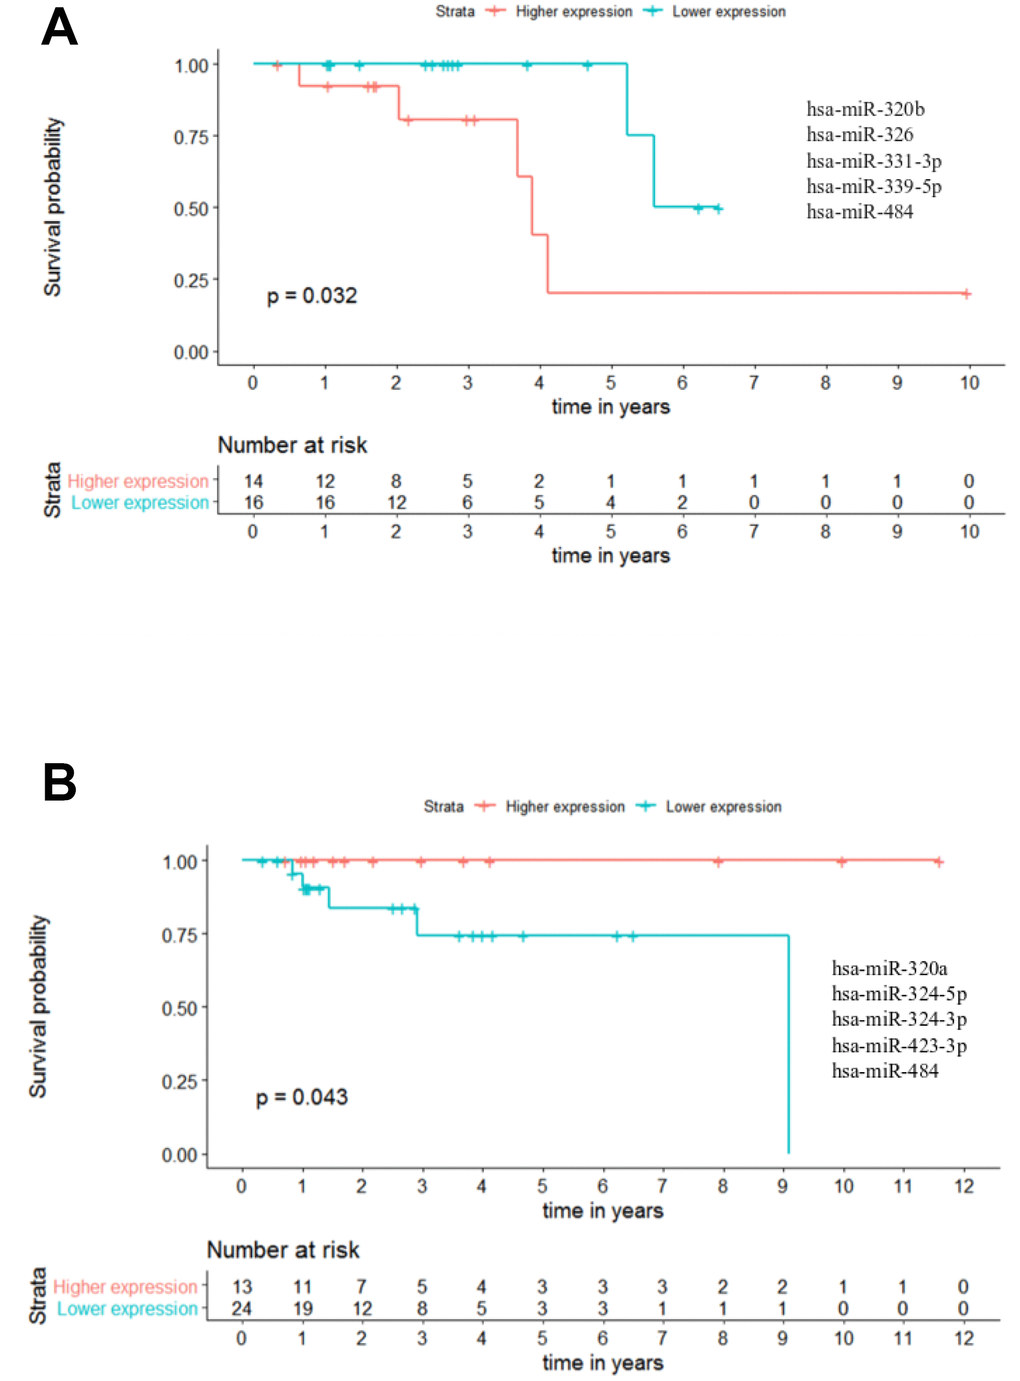 Panels of 5 miRNAs for overall survival (OS) and recurrence free survival (RFS) prognosis of stage II patients. (A) Stage II OS Kaplan-Meier curve based on miR-320b - miR-326 - miR-331-3p - miR-339-5p - miR-484 (p-value = 0.032, Log rank test; HR= 5.23) (B) Stage II recurrence free survival RFS Kaplan-Meier curve based on miR-320a - miR-324-5p - miR-324-3p - miR-423-3p - miR-484 (p-value = 0.043, Log rank test). Time is represented in years. Higher (in red) and Lower (in blue) expression groups represent the group of patients with miRNA expression above and below miRNAs median expression, respectively. Censored data is represented by small plus signs in each group. The number of patients at risk for each group and per time point is shown in the table below each graph. HR, hazard ratio.